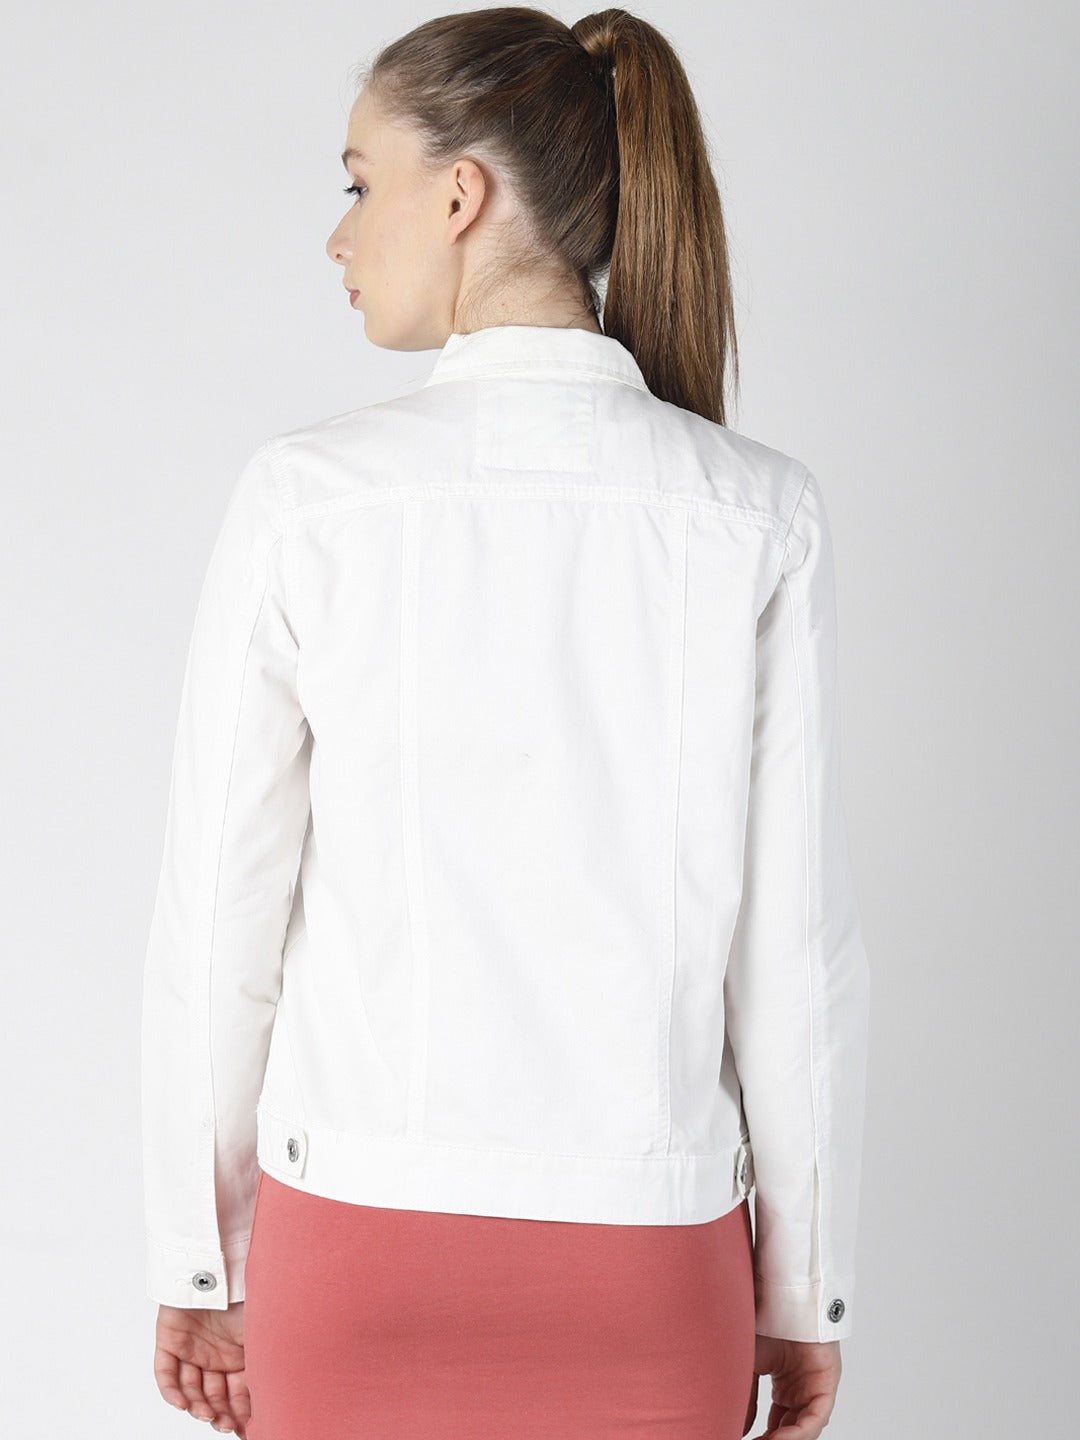 Women White Solid Jacket  - Front View - Available in Sizes XL